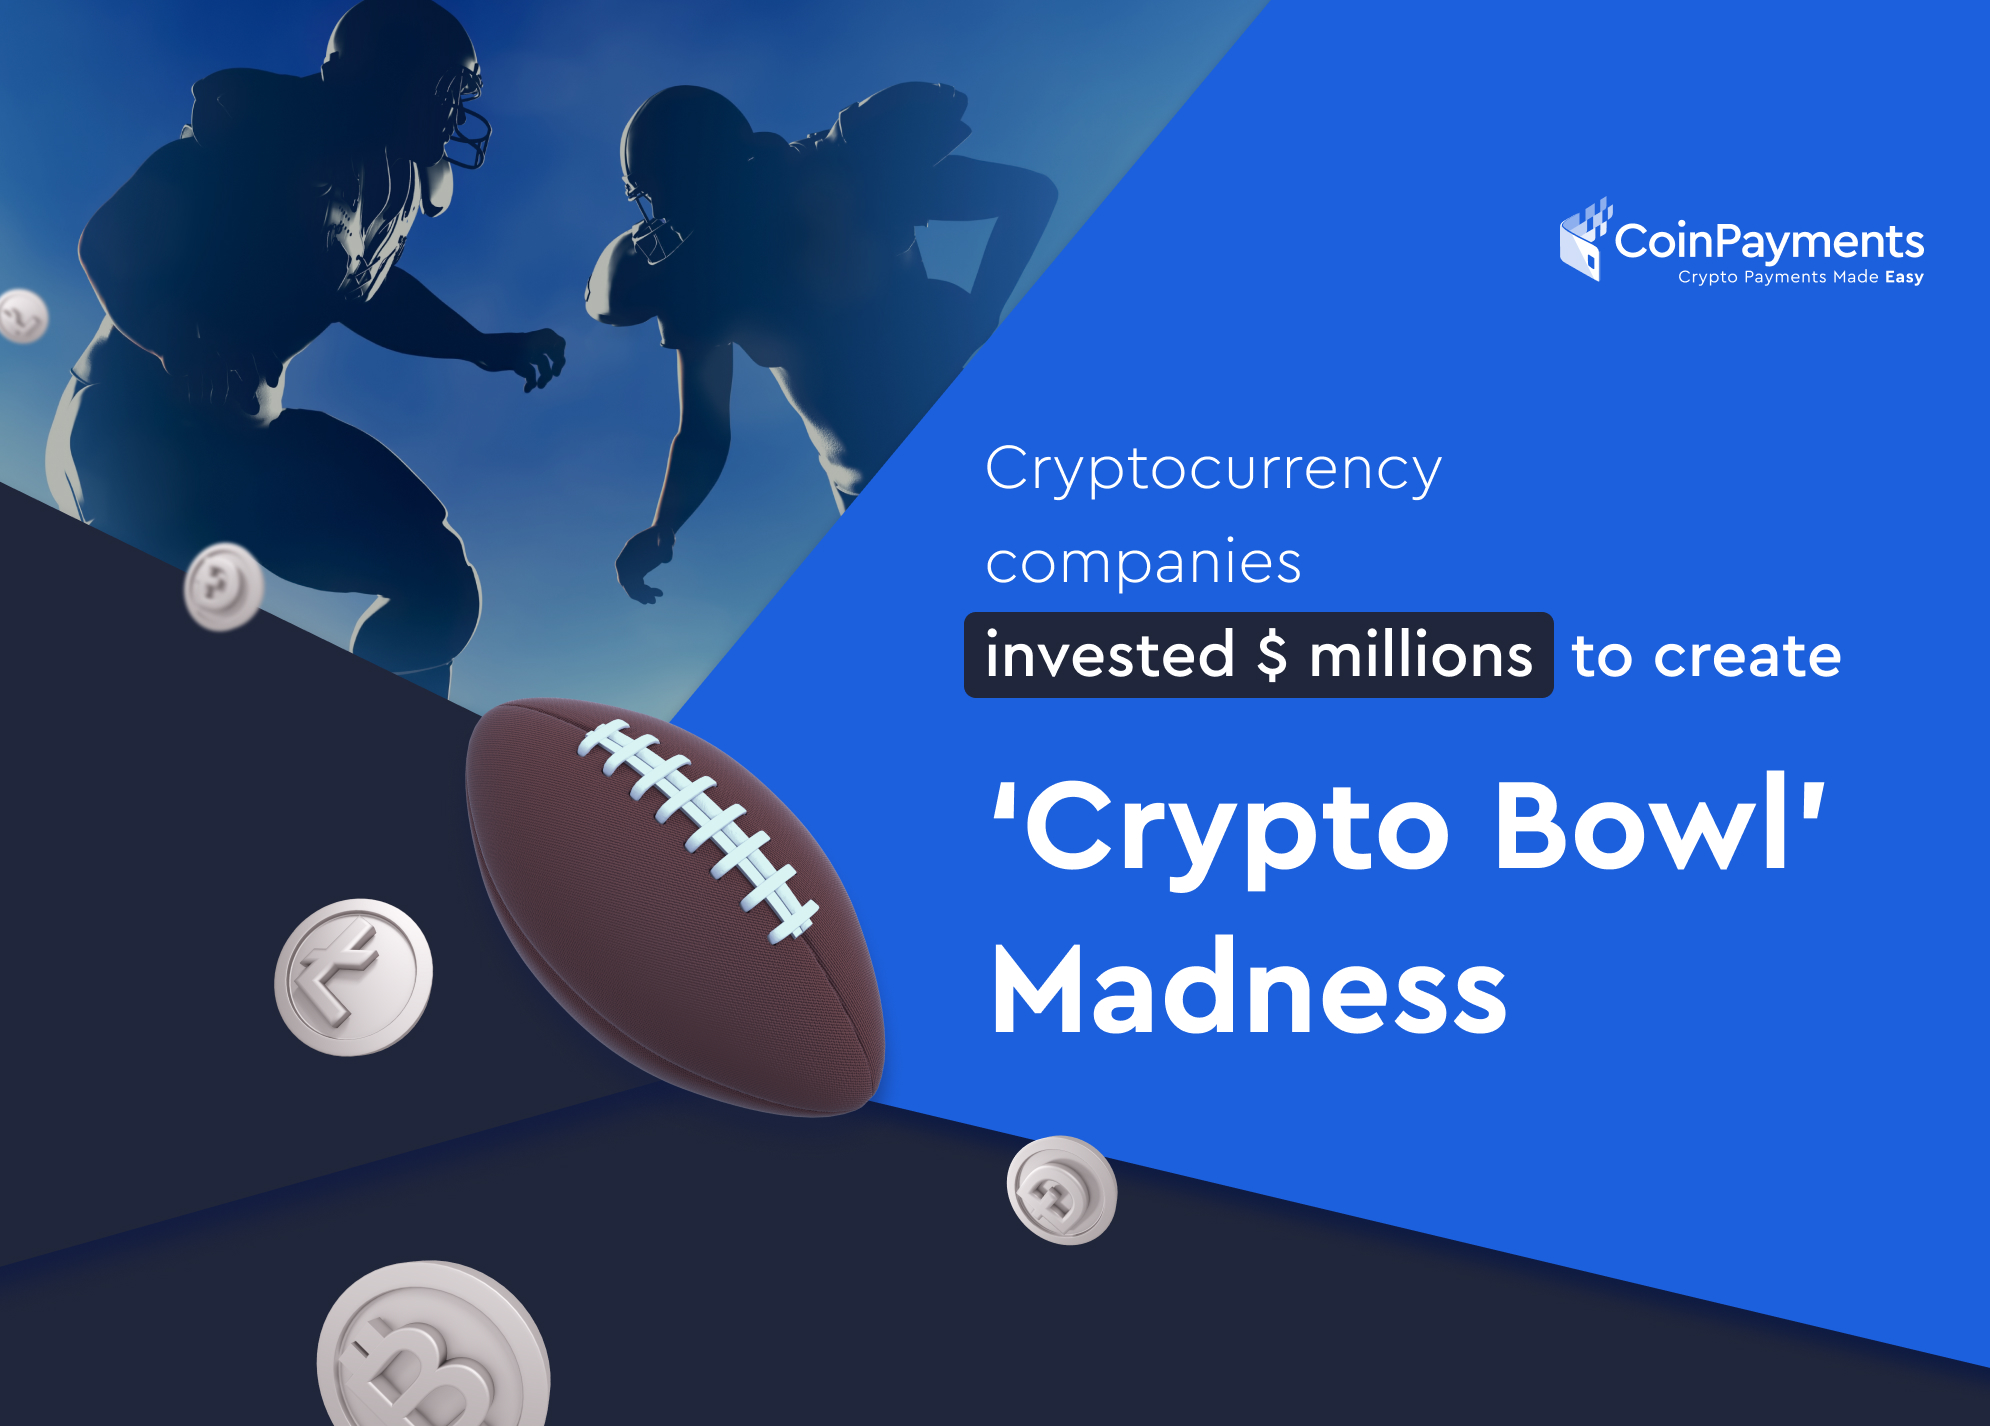 How was build the 'Crypto Bowl' Madness?